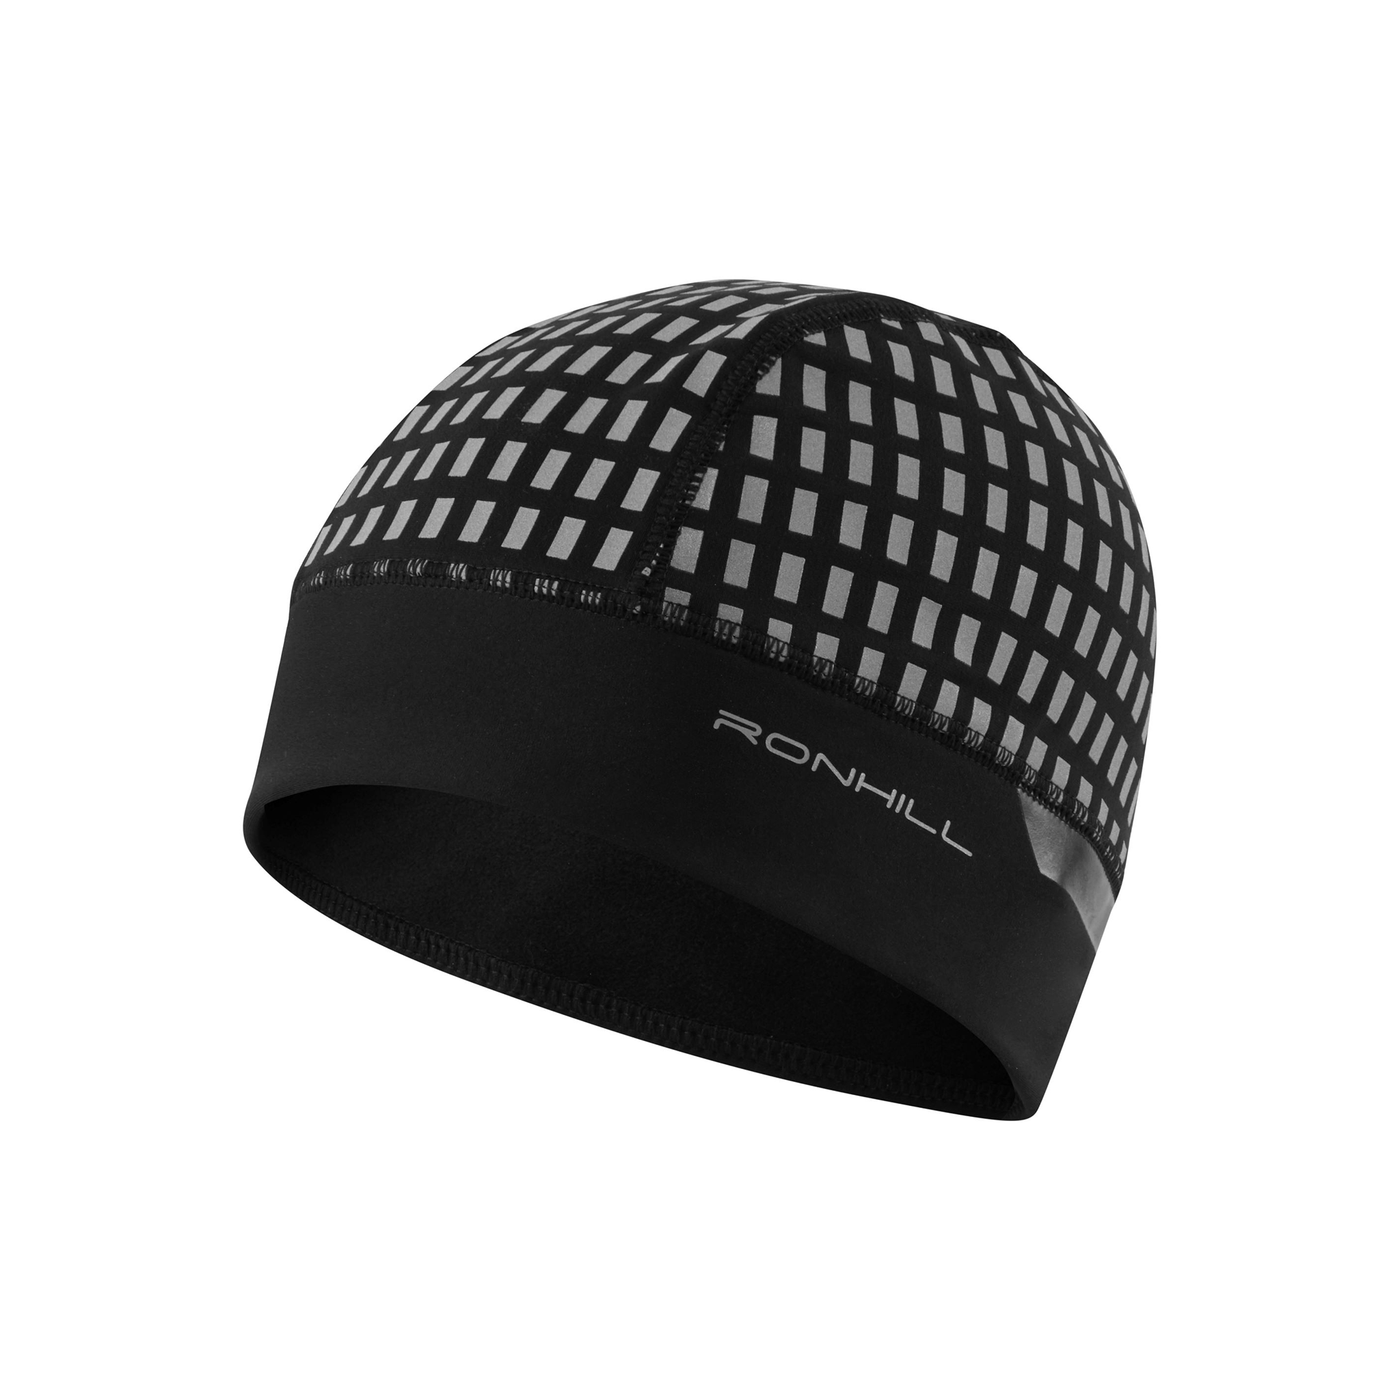 Ronhill Afterhours Beanie - Black/Bright White/Reflect